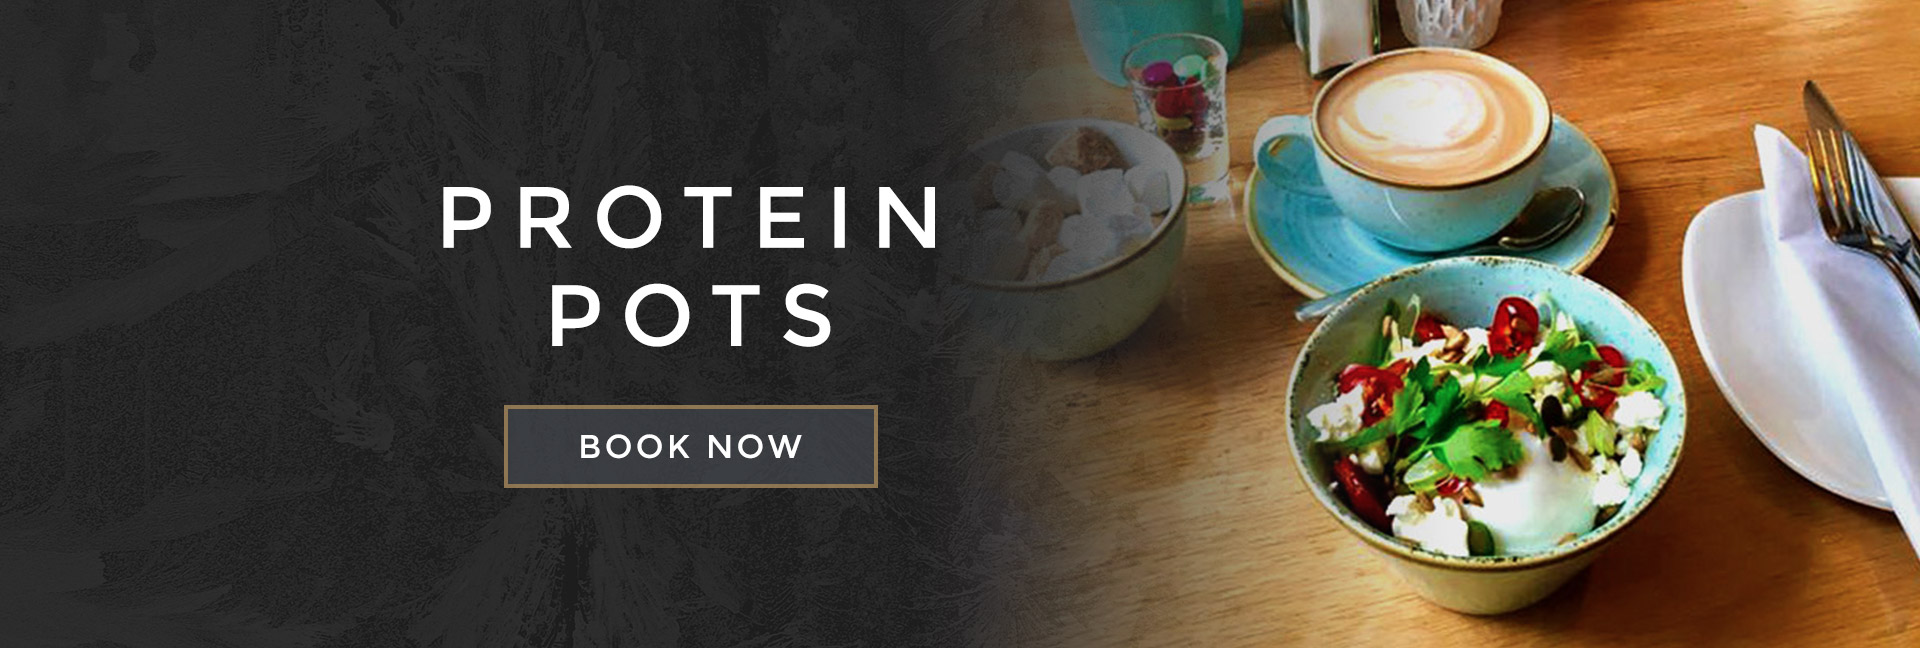 Protein pots at All Bar One Victoria - Book your table